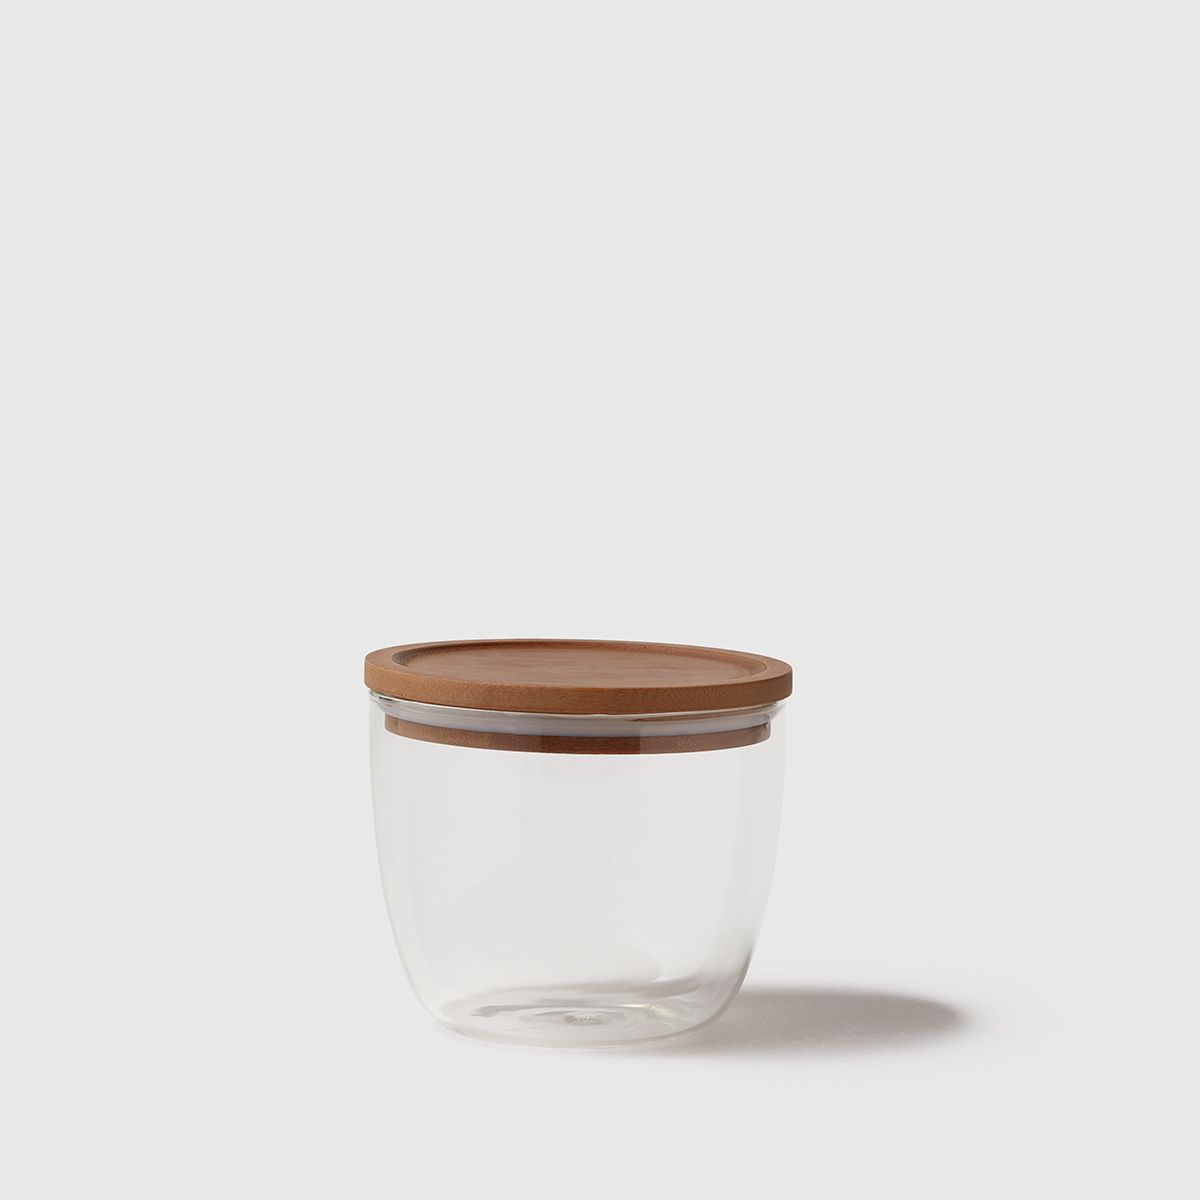 https://www.containerstore.com/catalogimages/404723/10083034-glass-modular-canister-smal.jpg